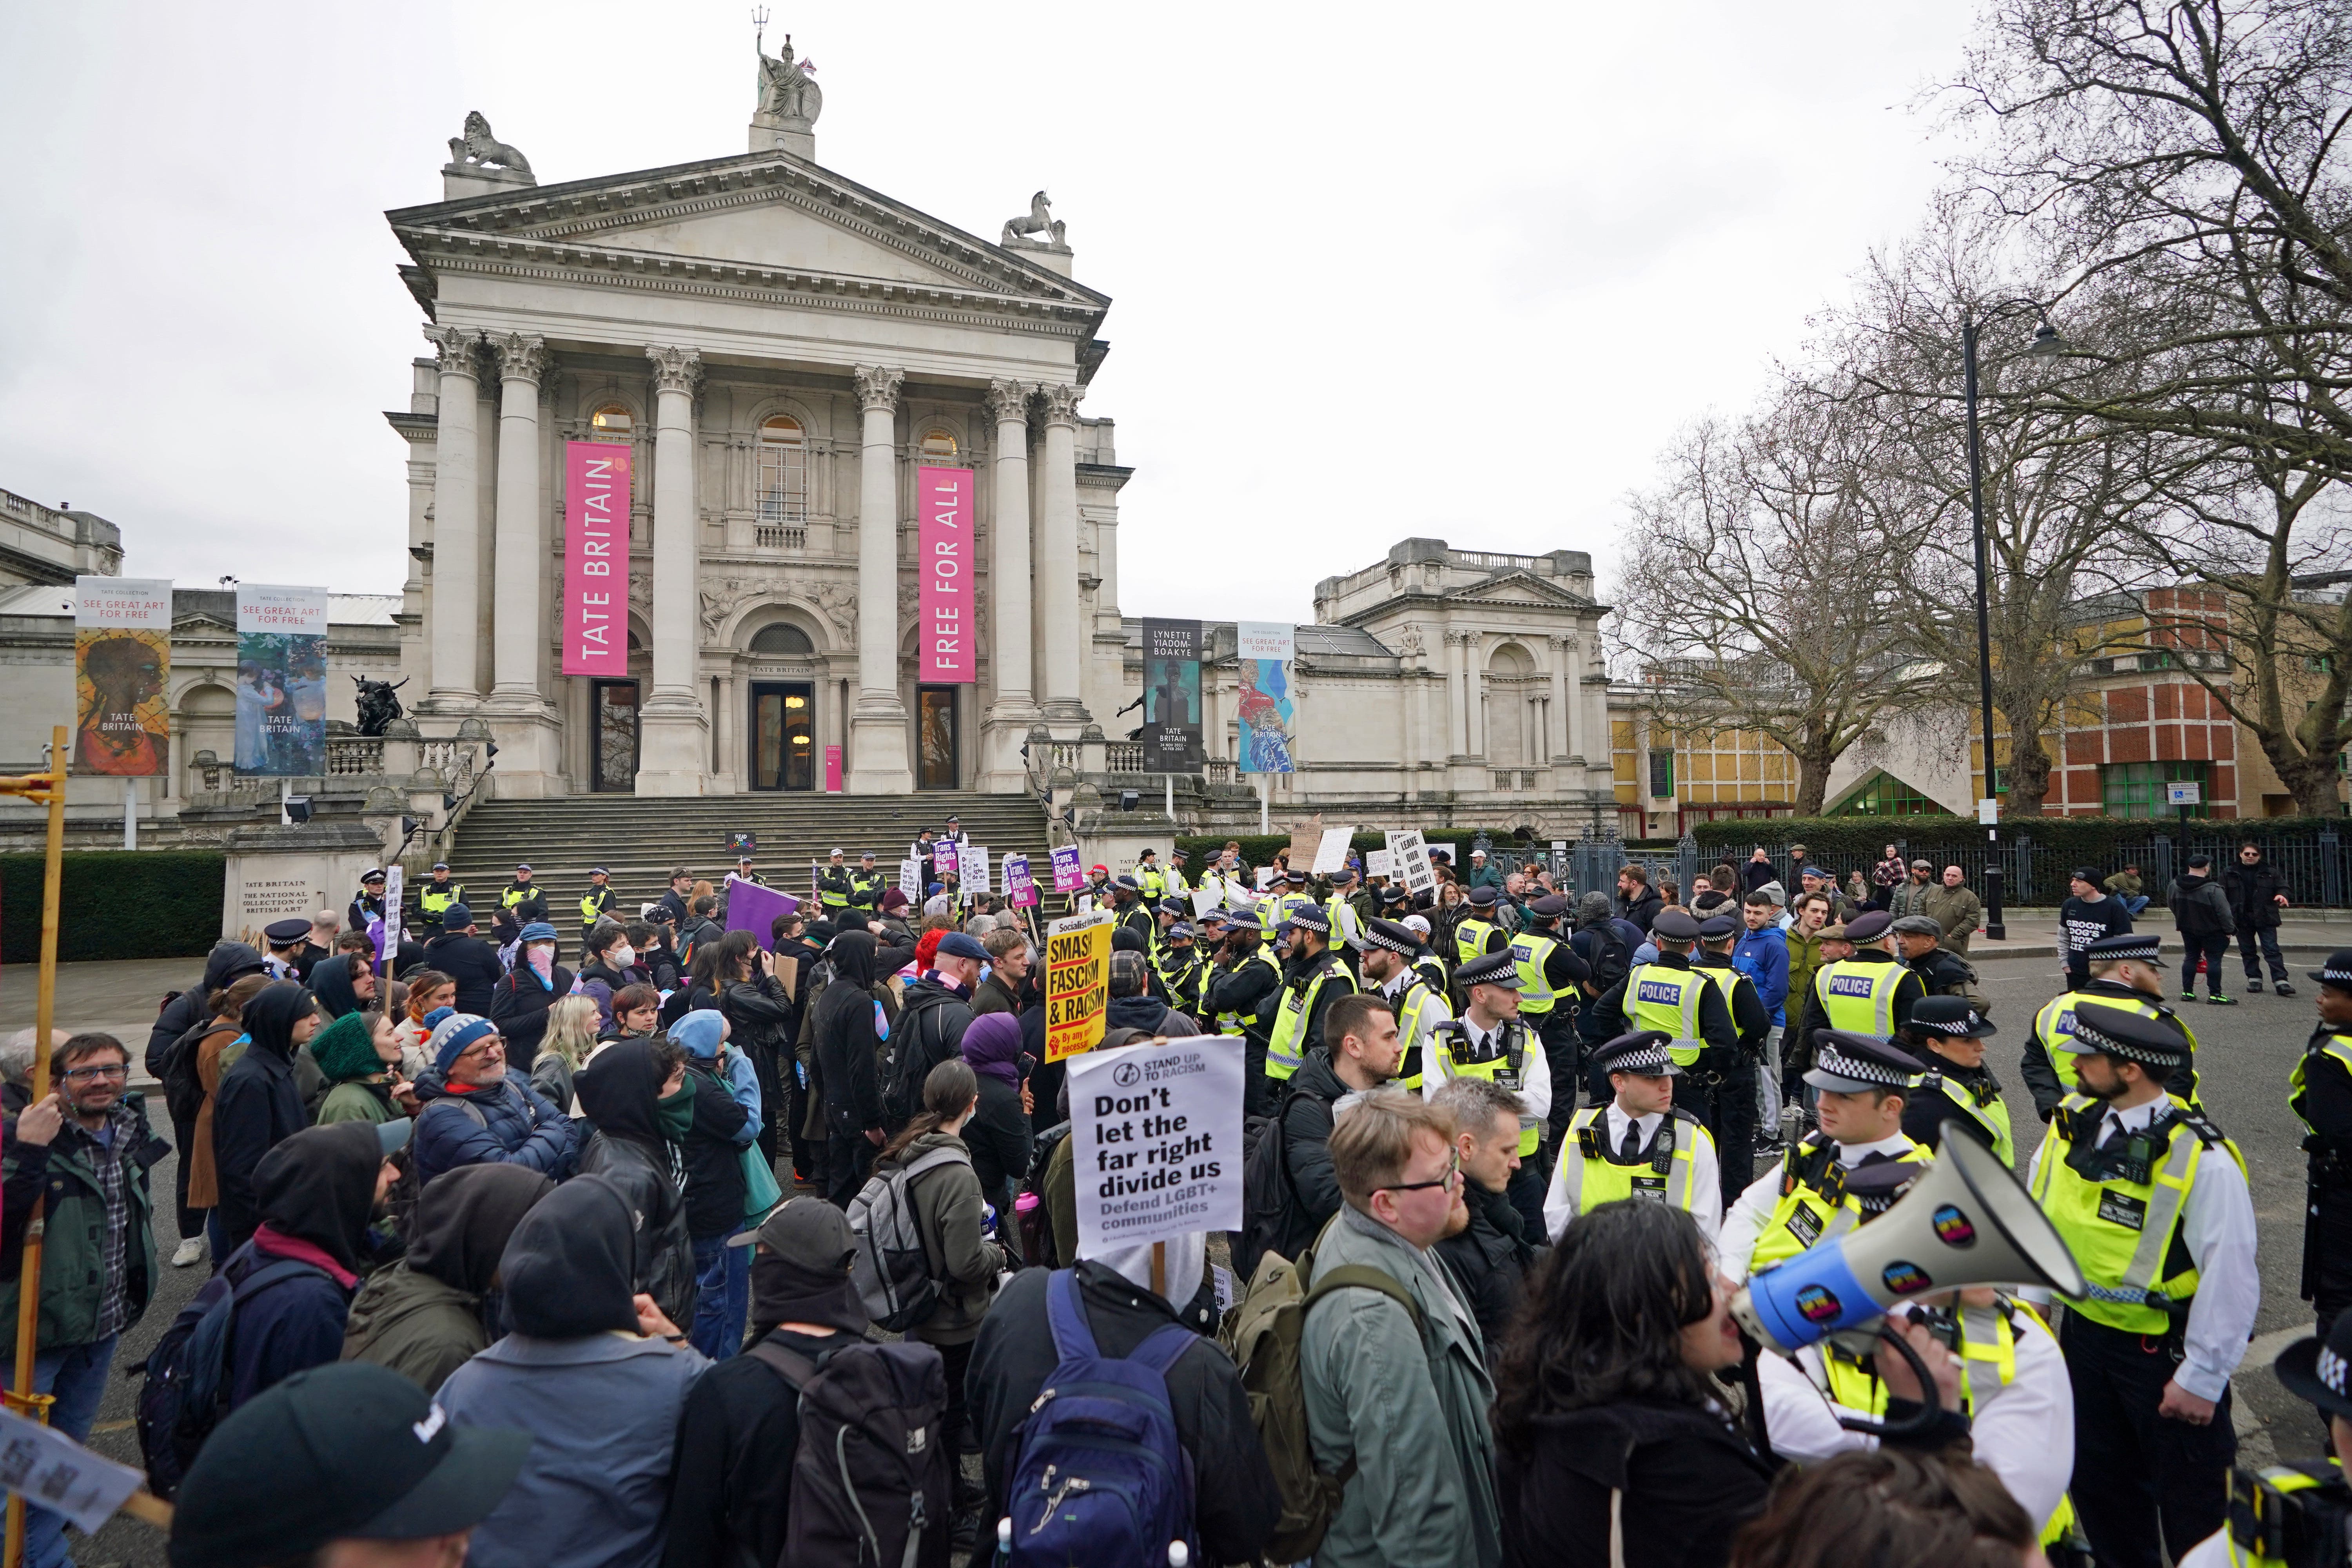 Protesters outside Tate Britain (James Manning/PA)